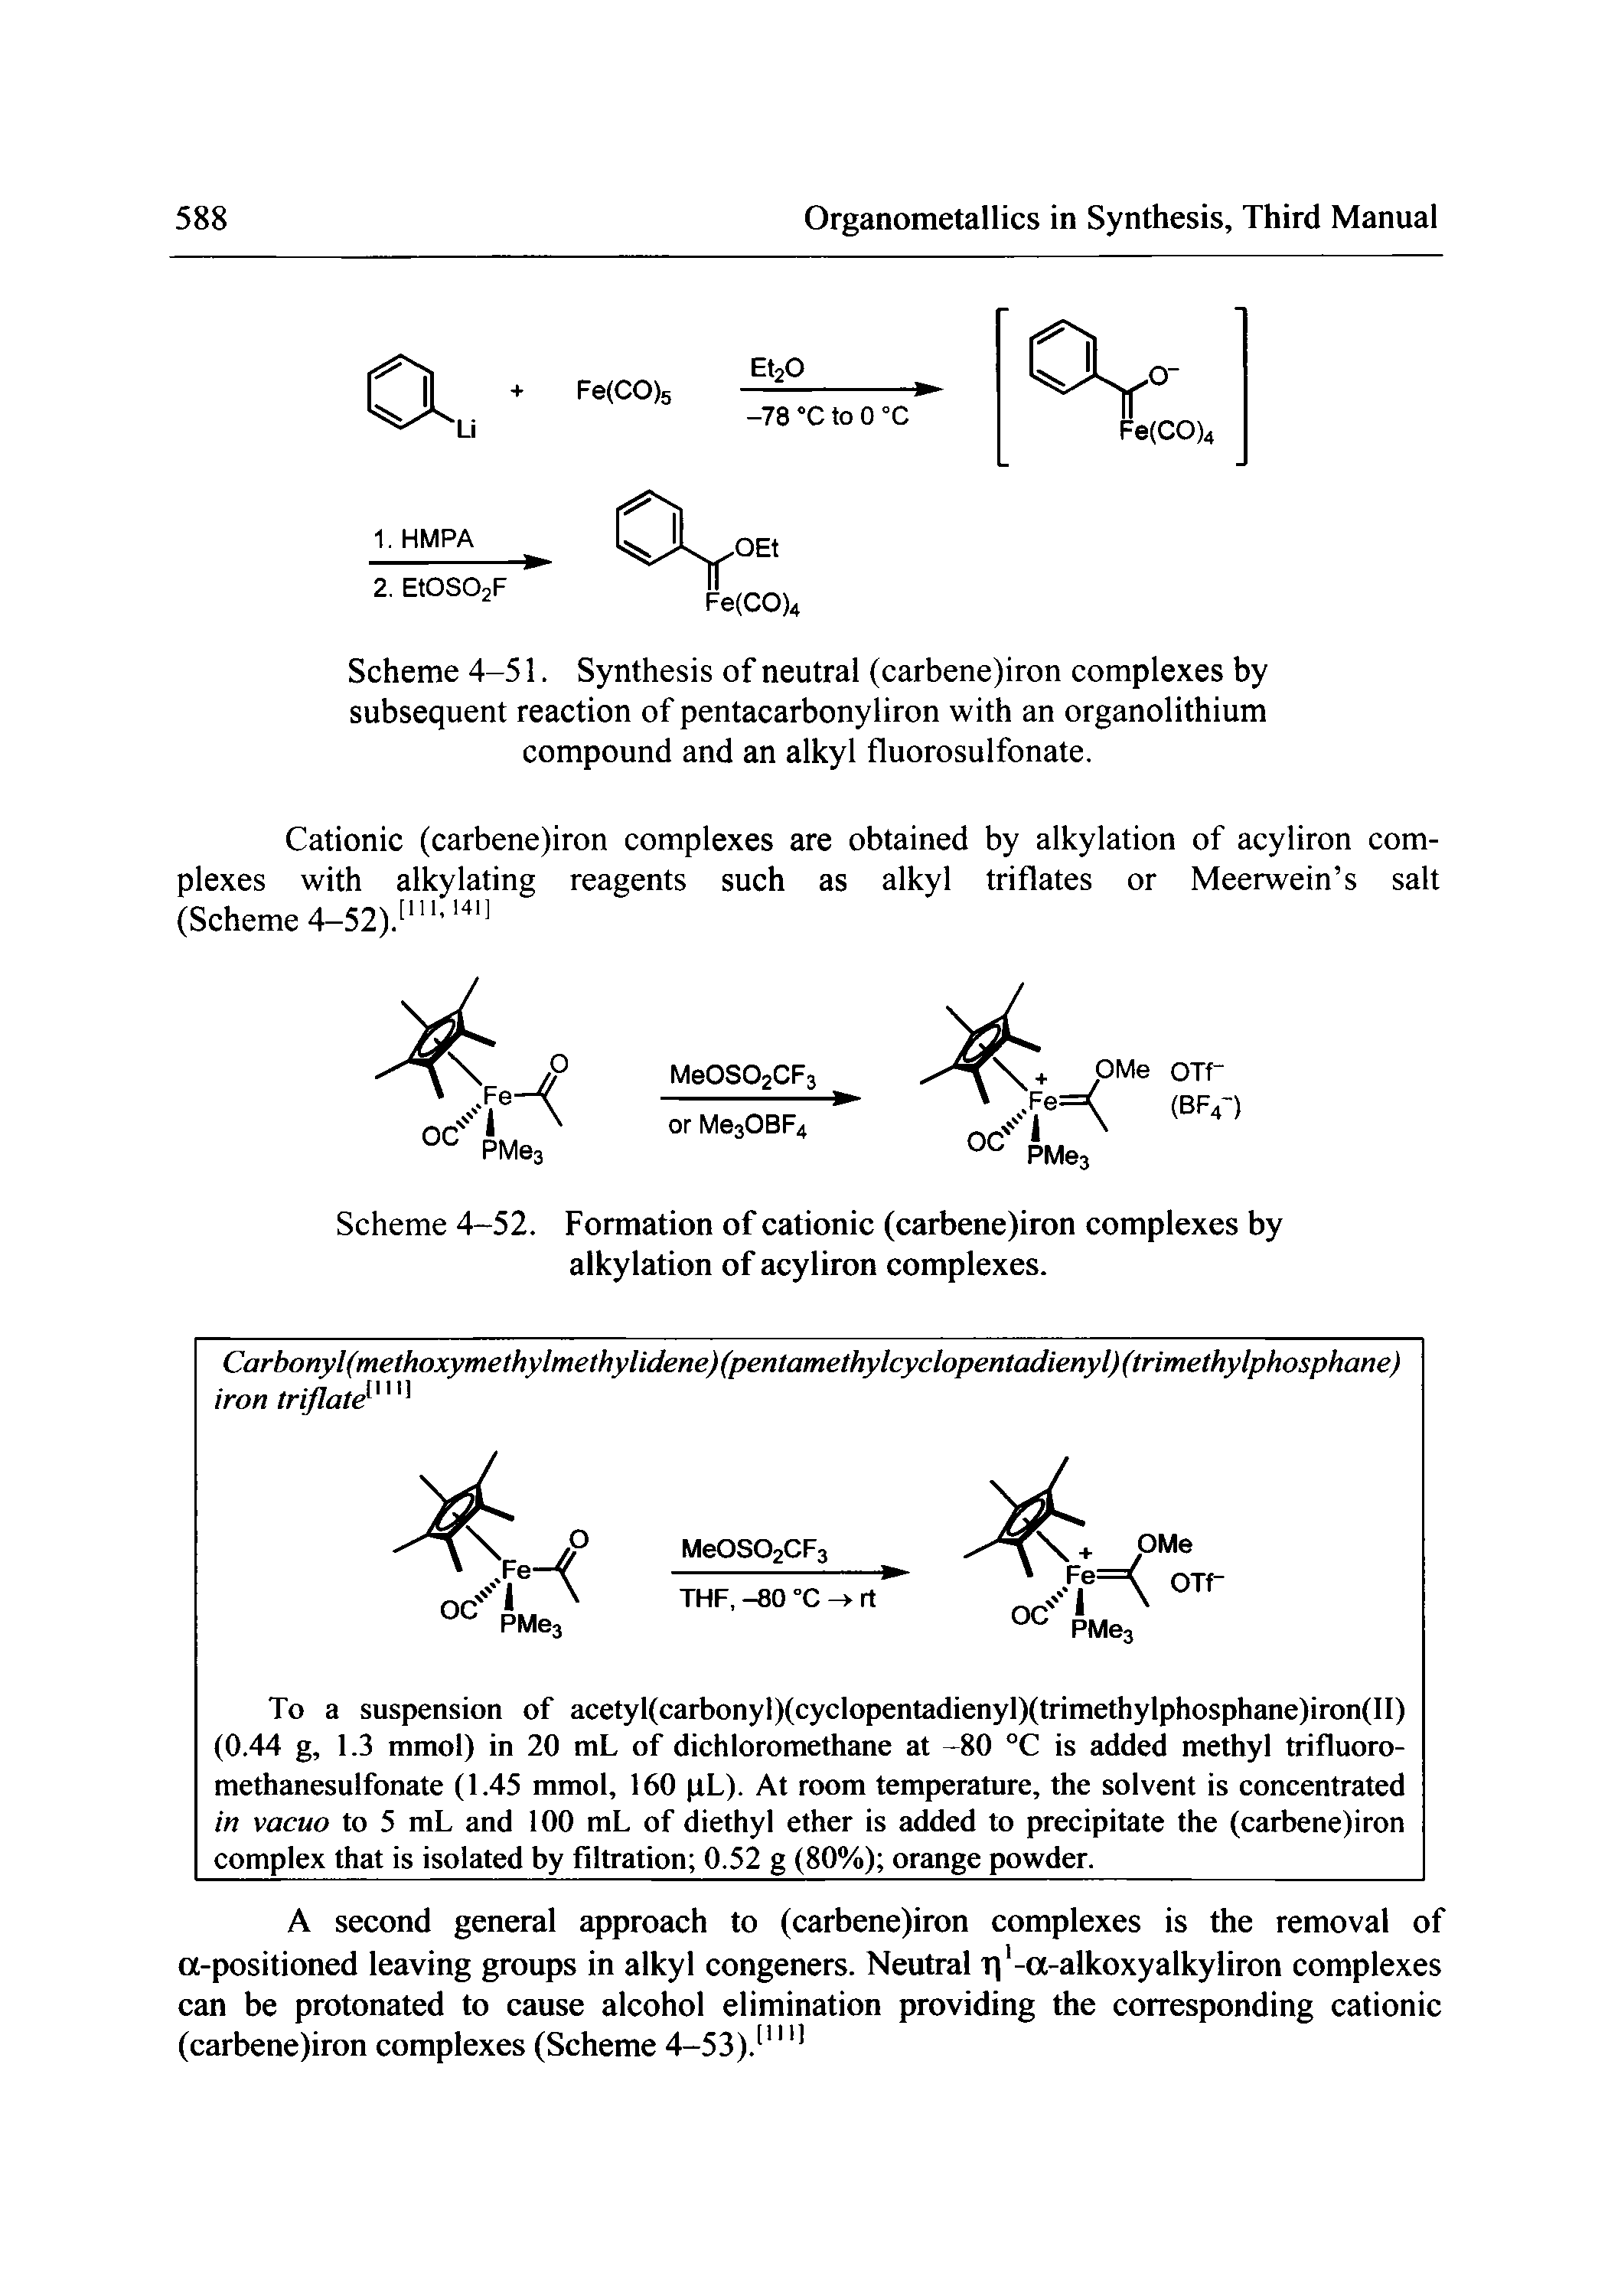 Scheme 4-51. Synthesis of neutral (carbene)iron complexes by subsequent reaction of pentacarbonyliron with an organolithium compound and an alkyl fluorosulfonate.